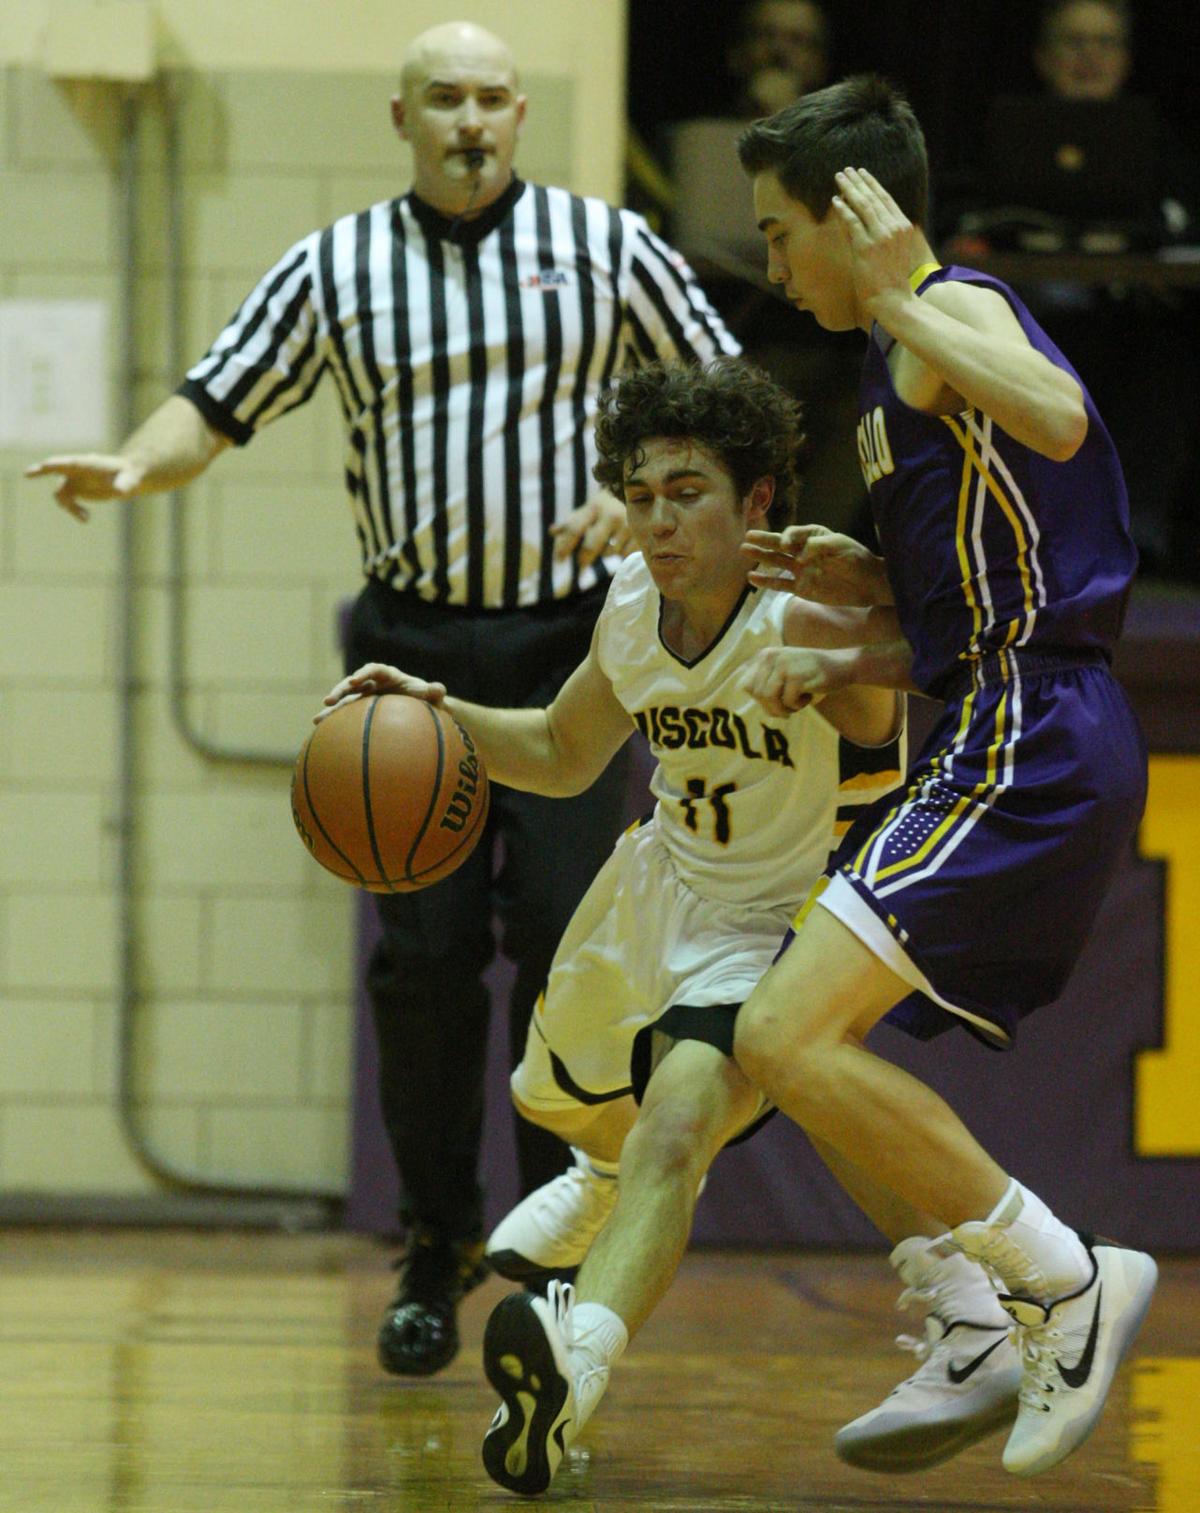 PHOTOS: Tuscola vs. Monticello at the Sages Holiday Hoopla Boys